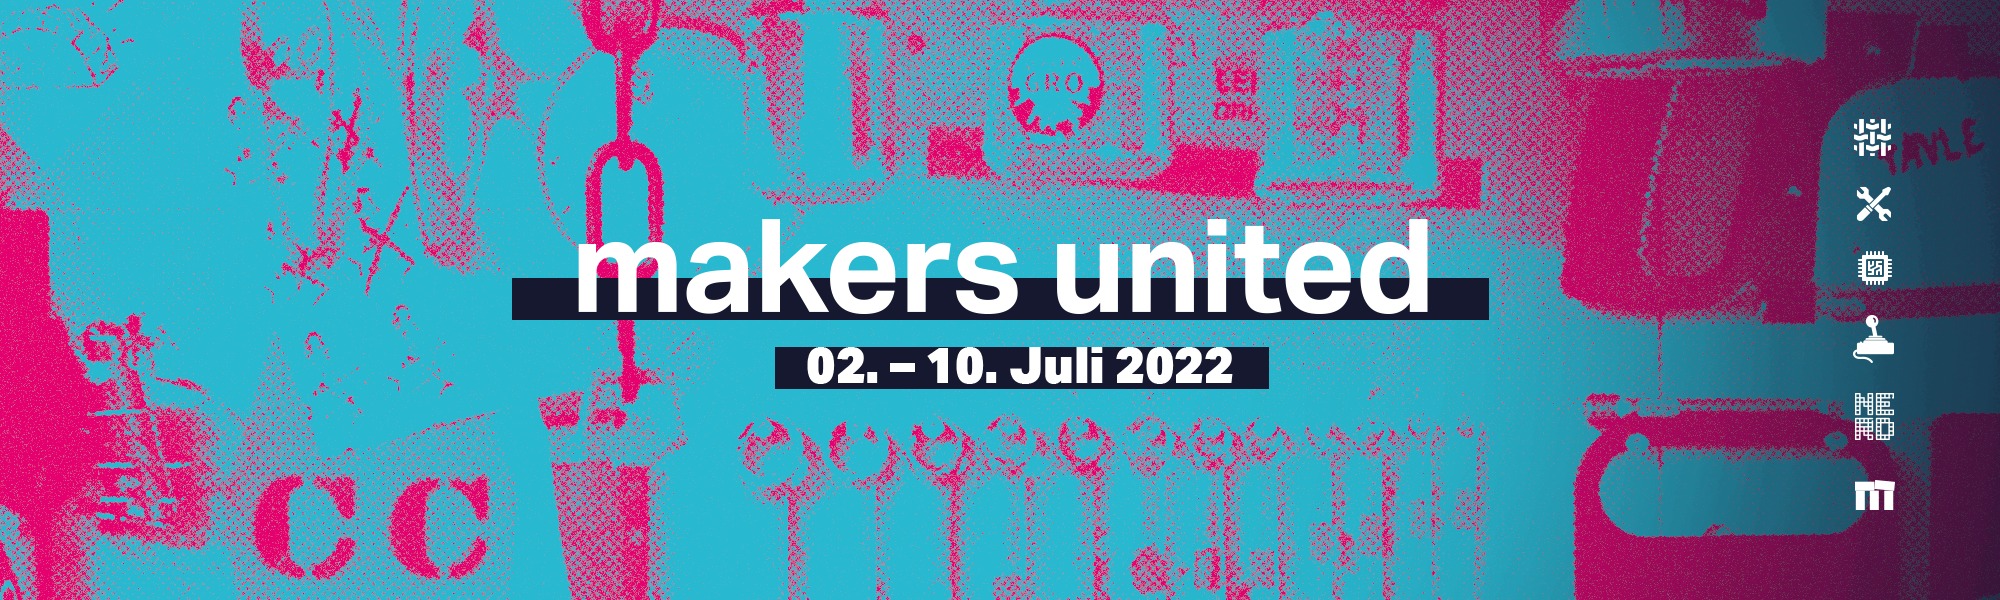 makers united